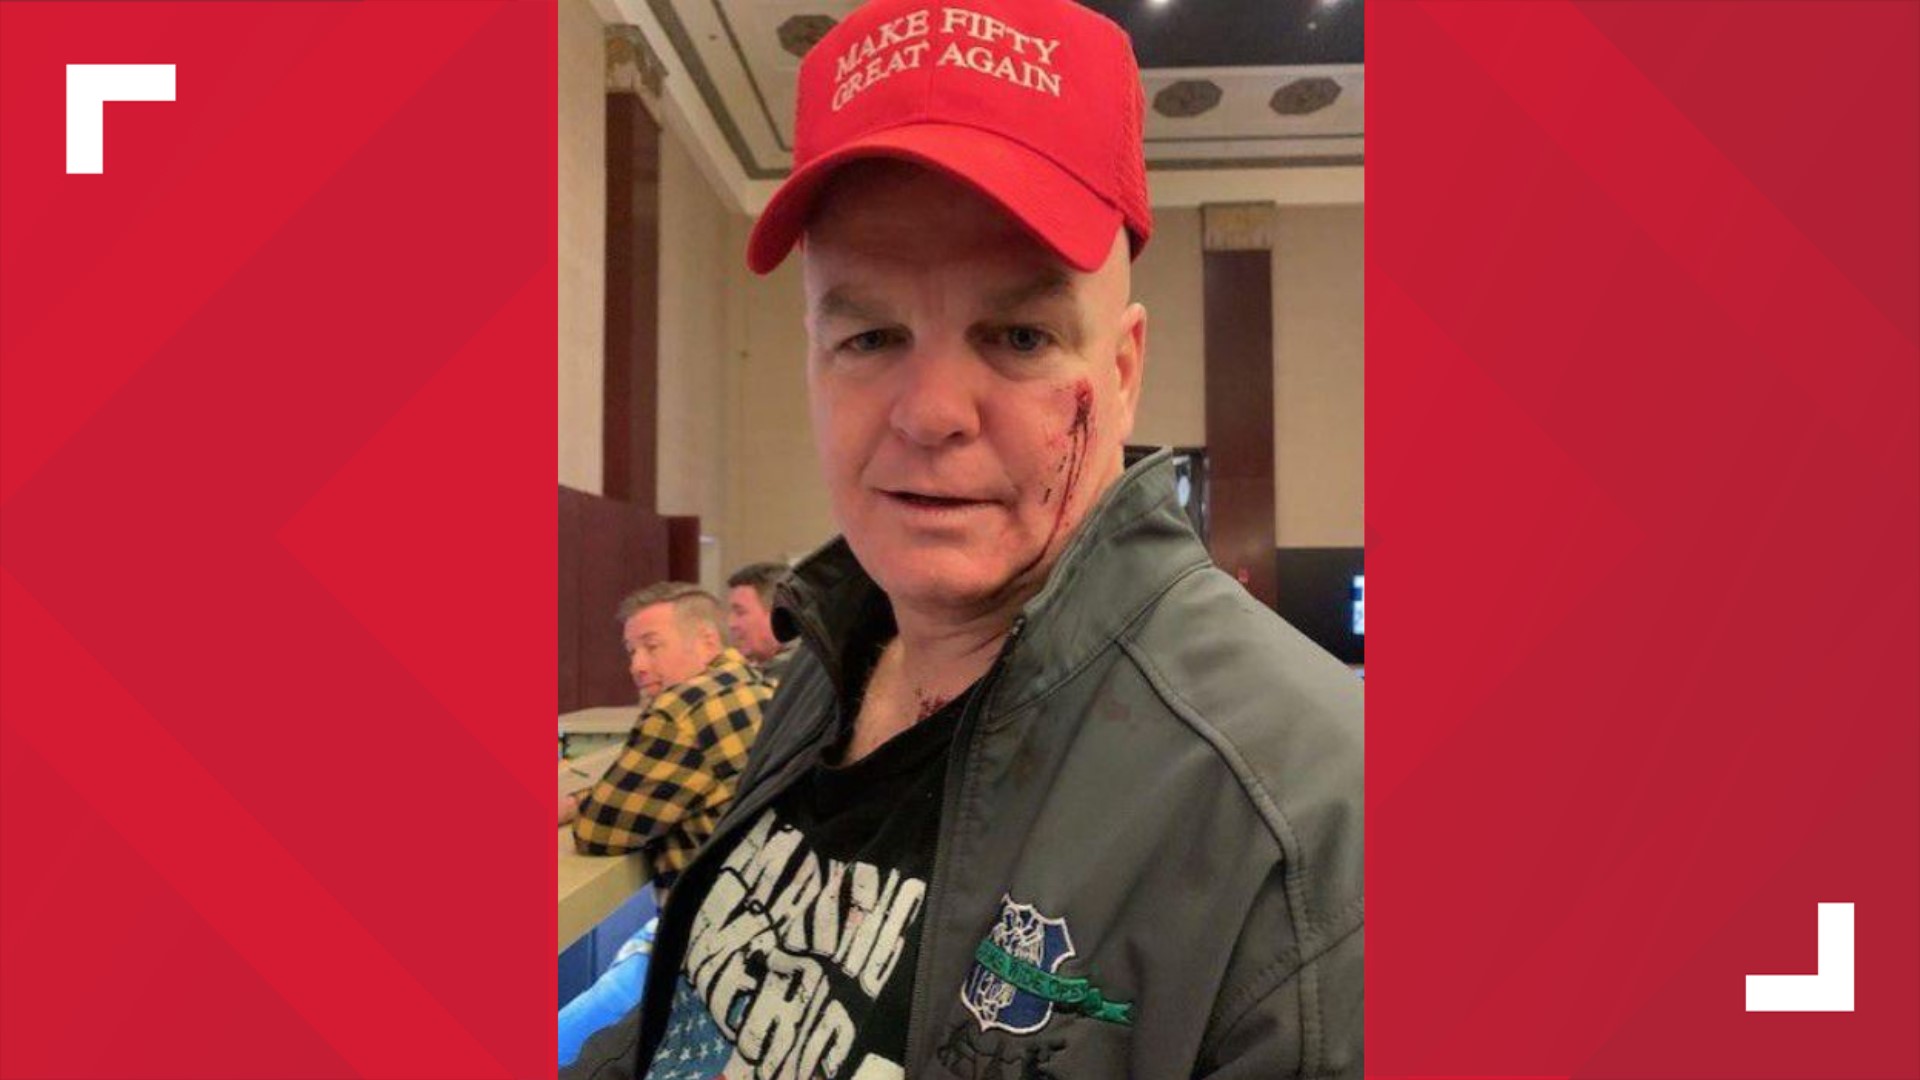 Daniel Sprague was at The Stage bar on Broadway sporting a gift his wife gave him for his 50th birthday bash—a hat that says "Make 50 Great Again."